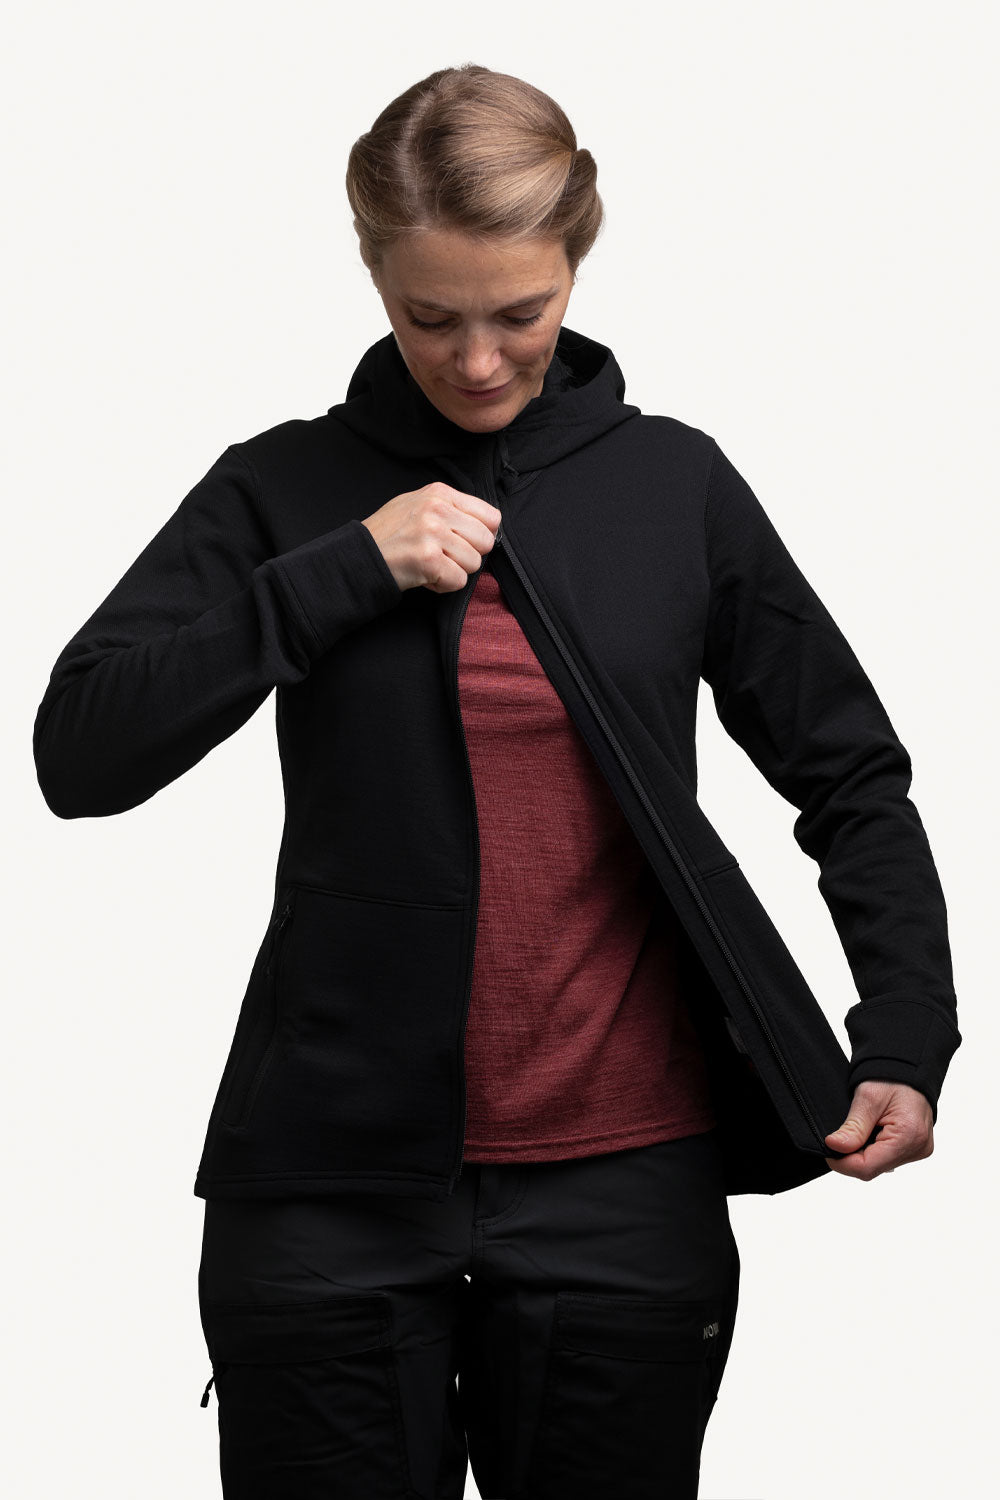 Women's all weather technical hoodie.